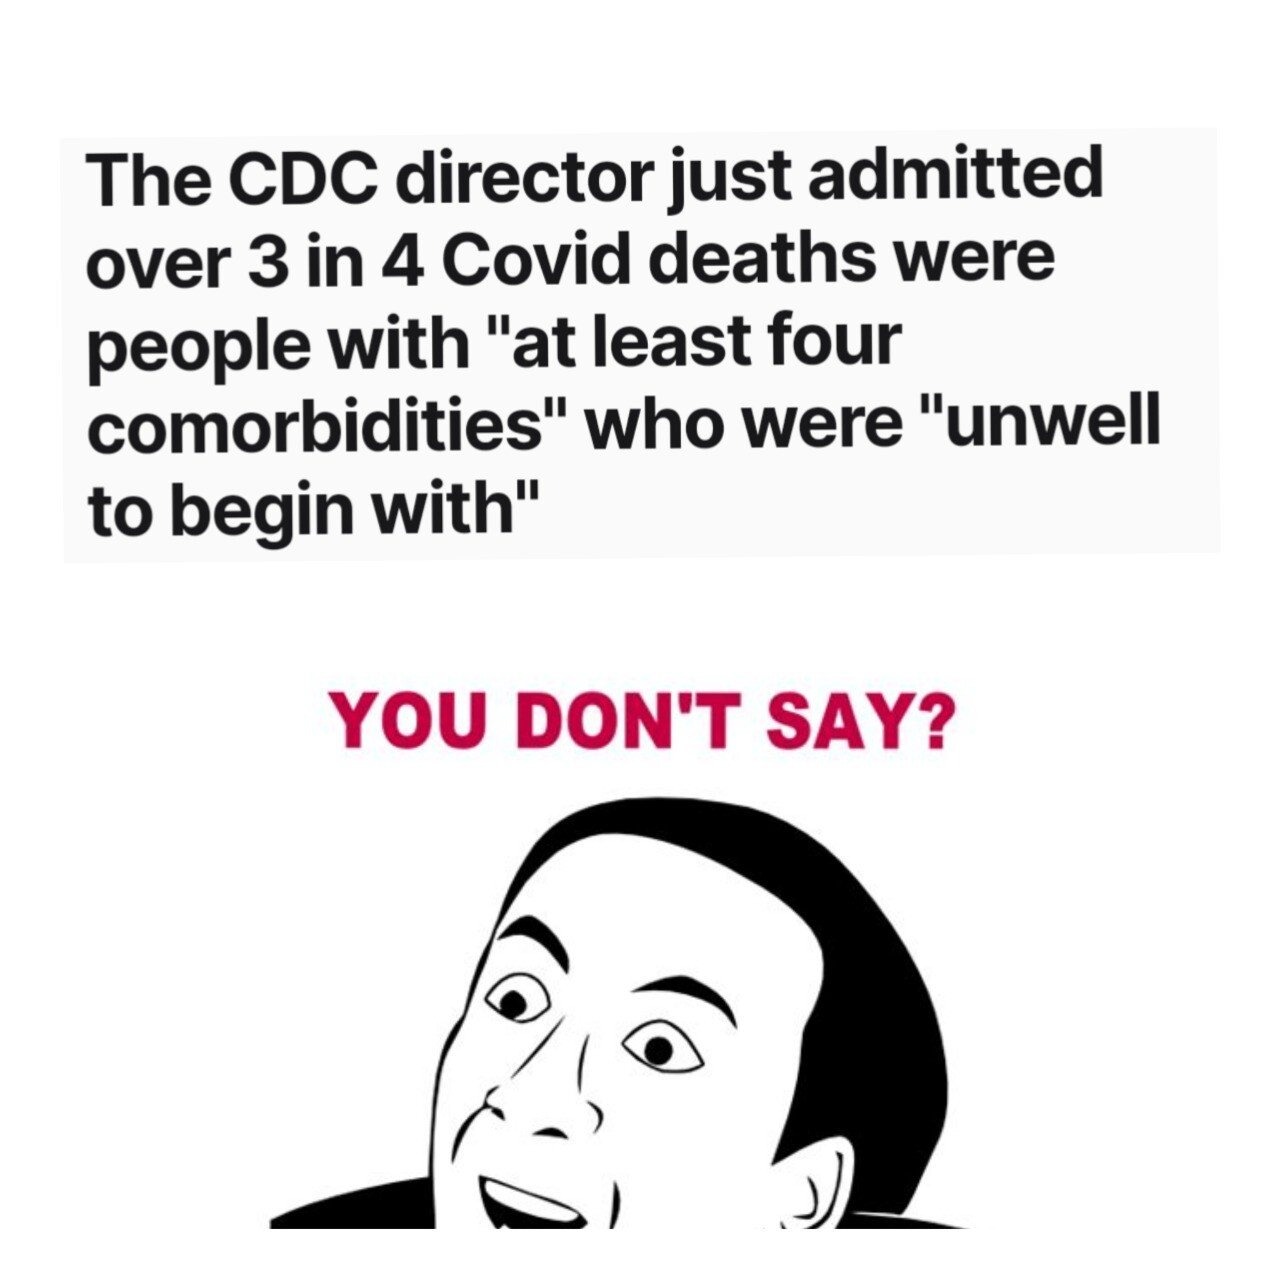 The CDC director just admitted 3 in 4 COVID deaths were people who were unwell to begin with! | image tagged in cdc,admission,centers for democrat control,covidiots,sounds like communist propaganda,crush the commies | made w/ Imgflip meme maker